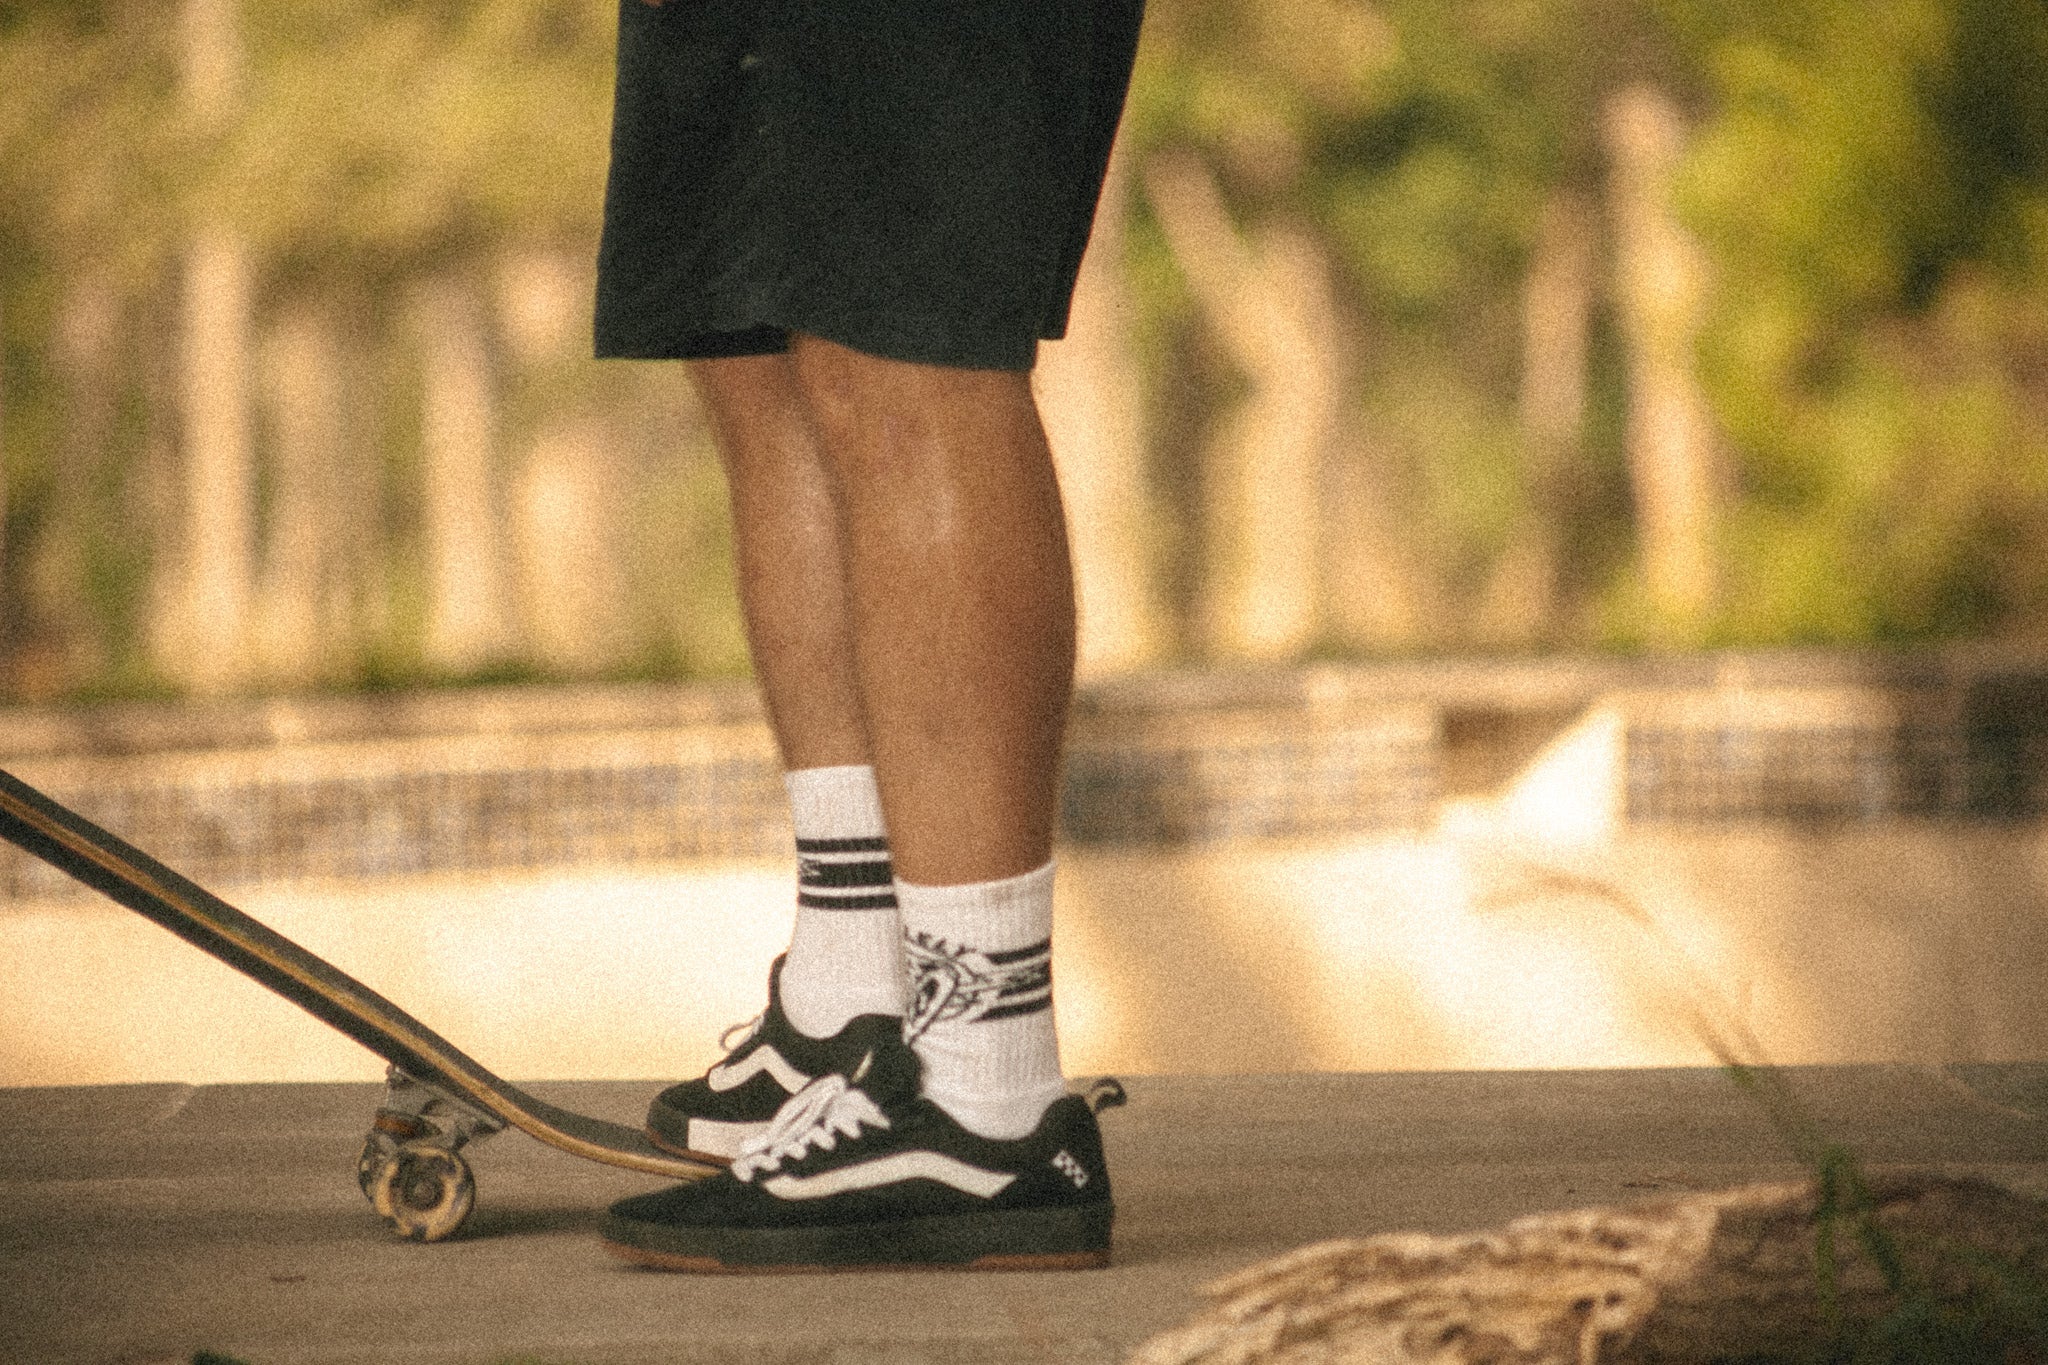 Mike Vallely x Dirty Donny Collaboration Crew Socks | White